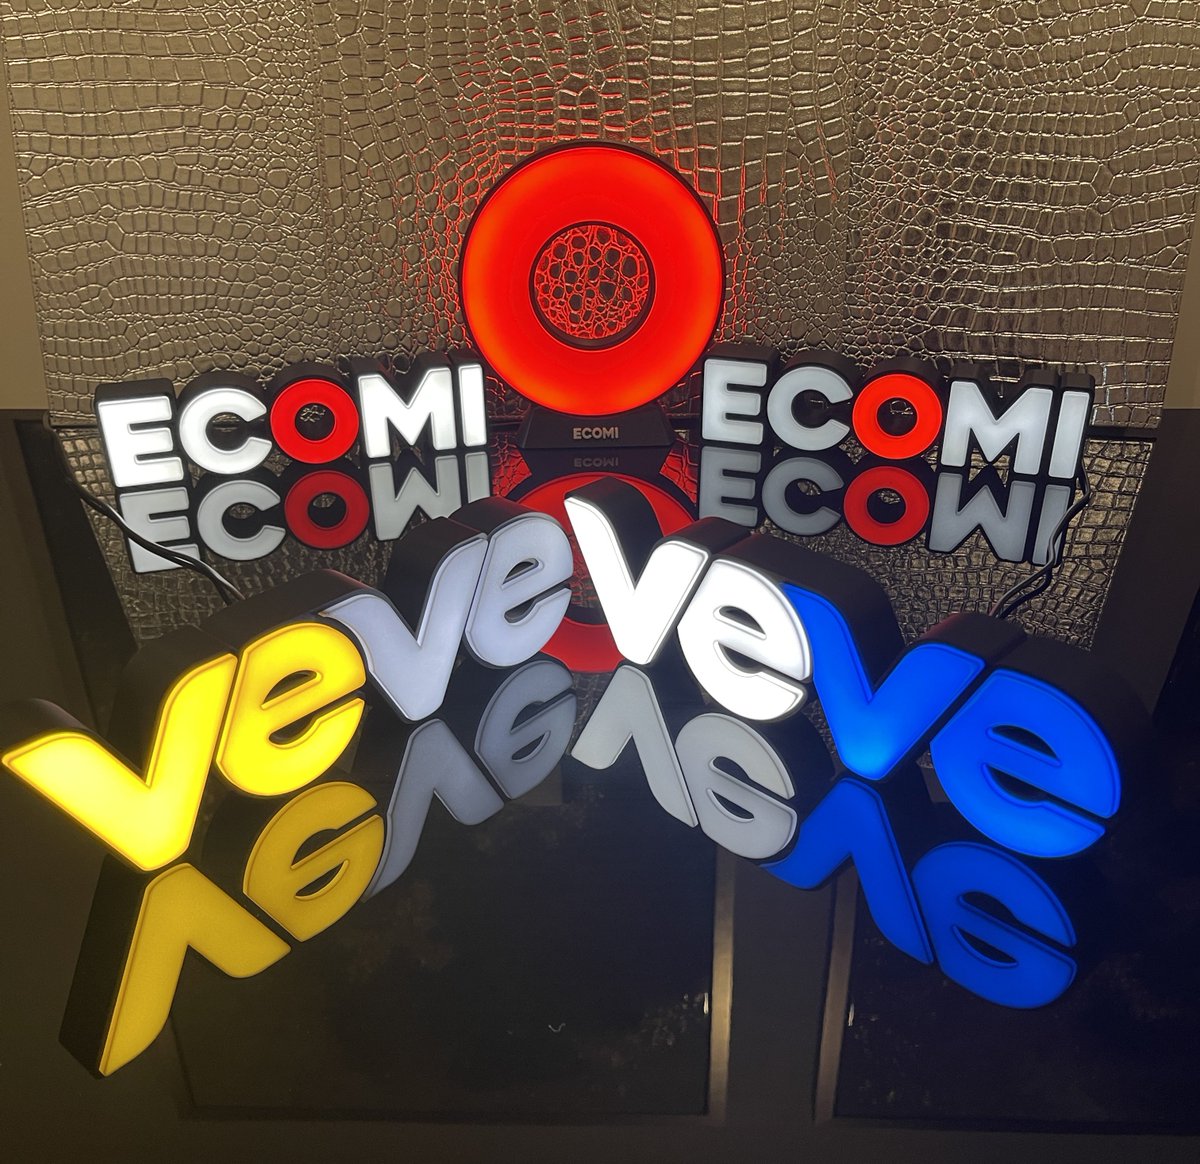 🥂Thanks @Stan_Bucasas! 
⚡️You’re a special artisan, craftsman and generous!!
⭕️ These #ECOMI #VeVe #RedO lamps are an incredible gift and so spectacular! I treasure them!!

🎁 I want to spread the love and share a few of these with the #EcomiSRLogo Group. 
🎁 Will buy a few &